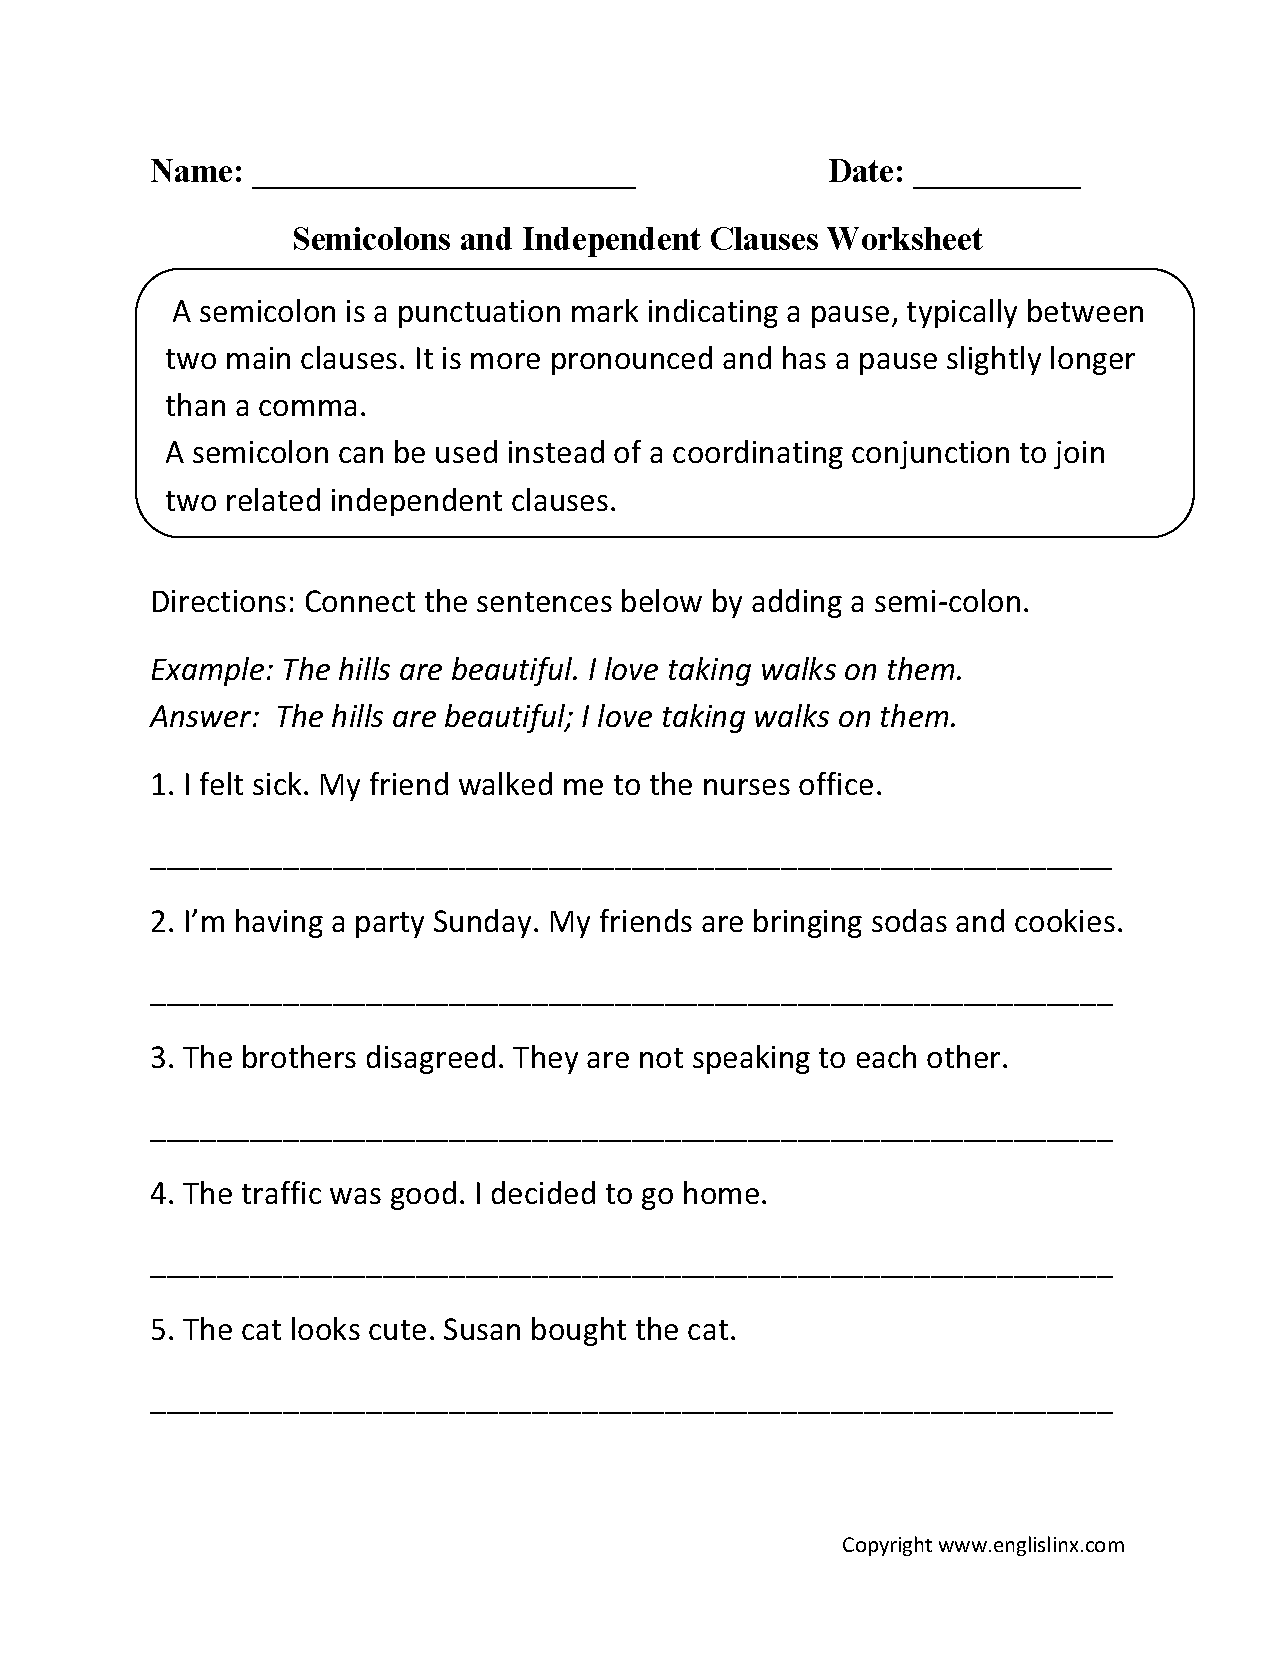 Semicolon and Independent Clause Worksheet